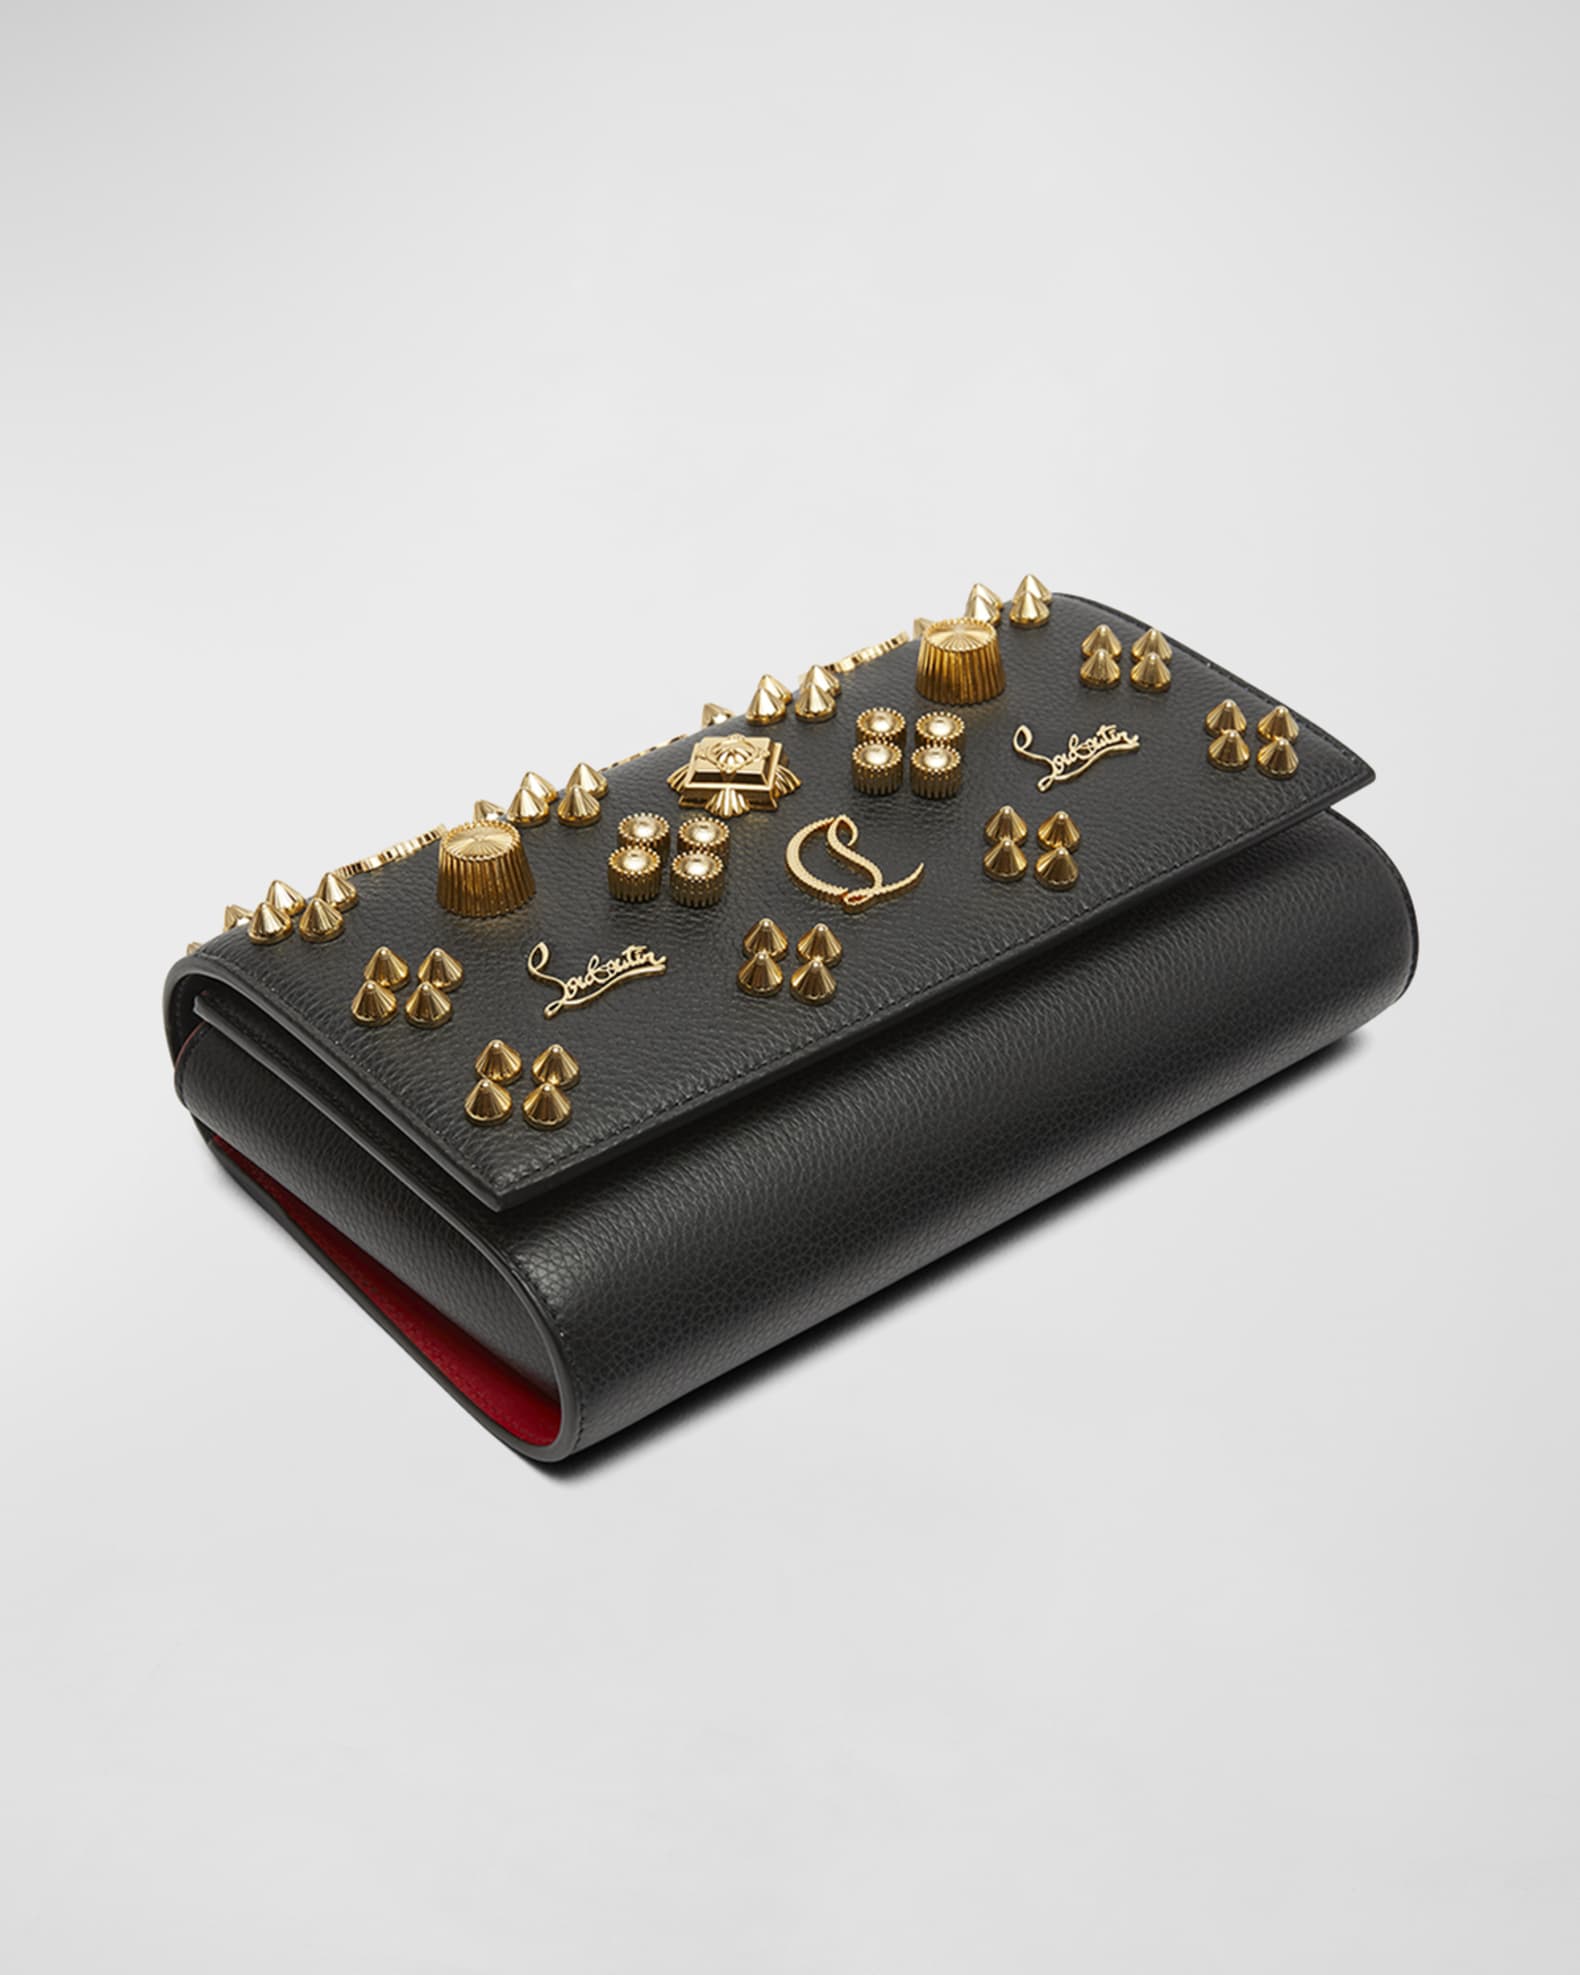 Christian Louboutin clutch bag Blaster leather black gold and silver studs  Men's